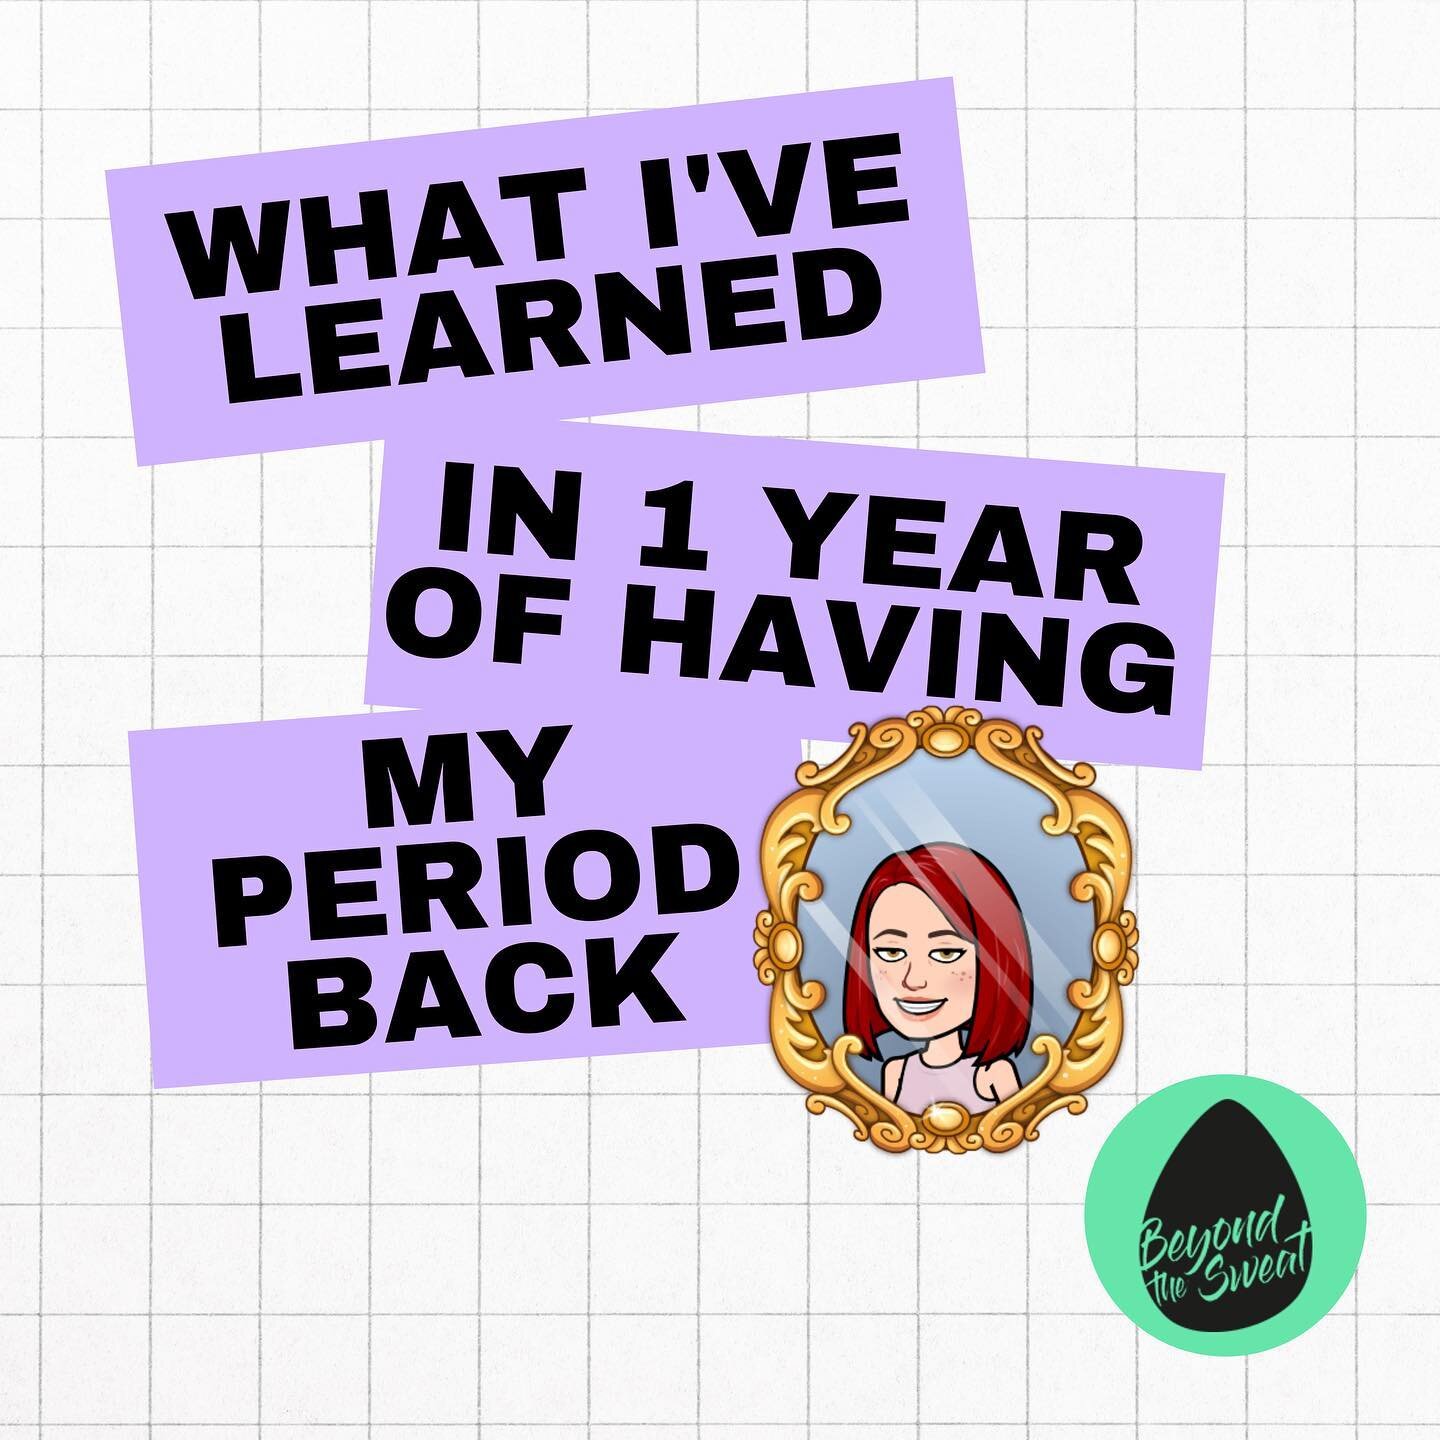 What I've learned in 1 year of having my period back:

1) No matter how many people tell you &quot;it will all be worth it&quot;, the process still sucks.
You will believe it won't happen for you multiple times a week.

2) The process doesn't finish 